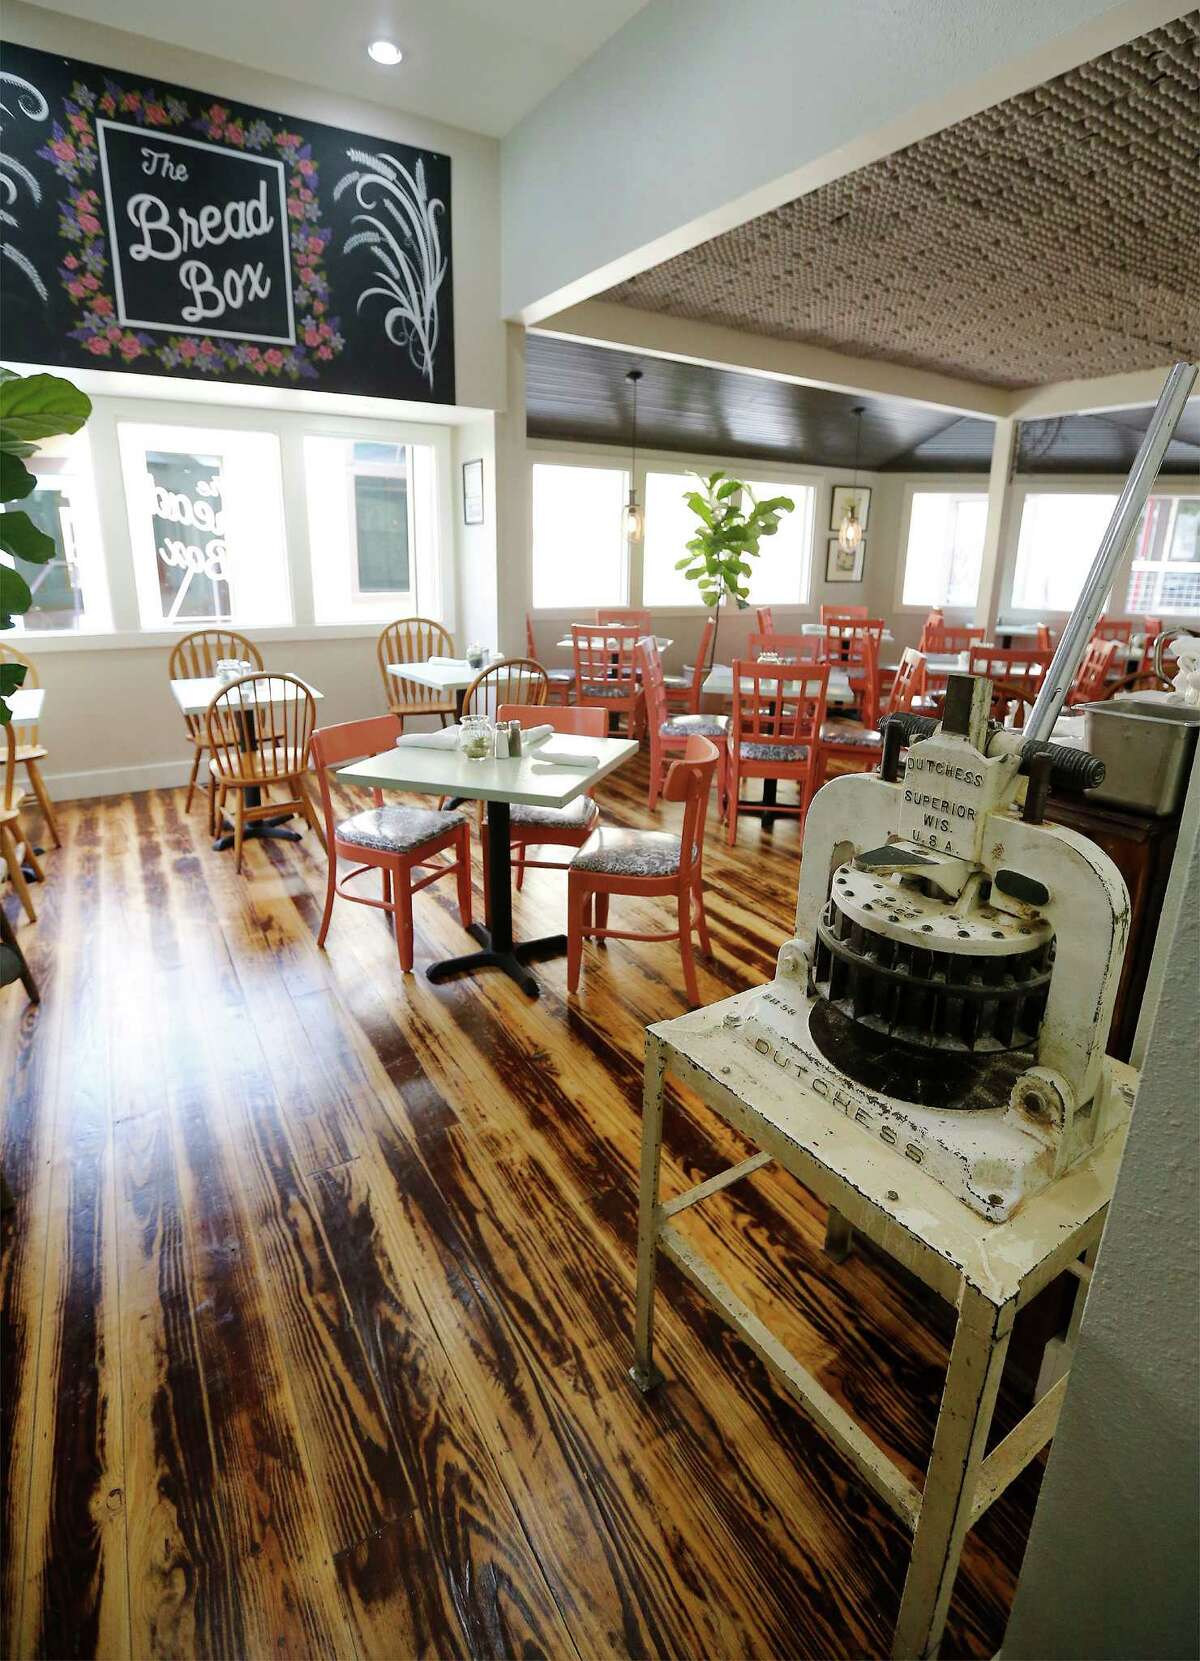 Interior view of the dining room of The Bread Box in Artisan Alley on Tuesday, Mar. 15, 2016. (Kin Man Hui/San Antonio Express-News)